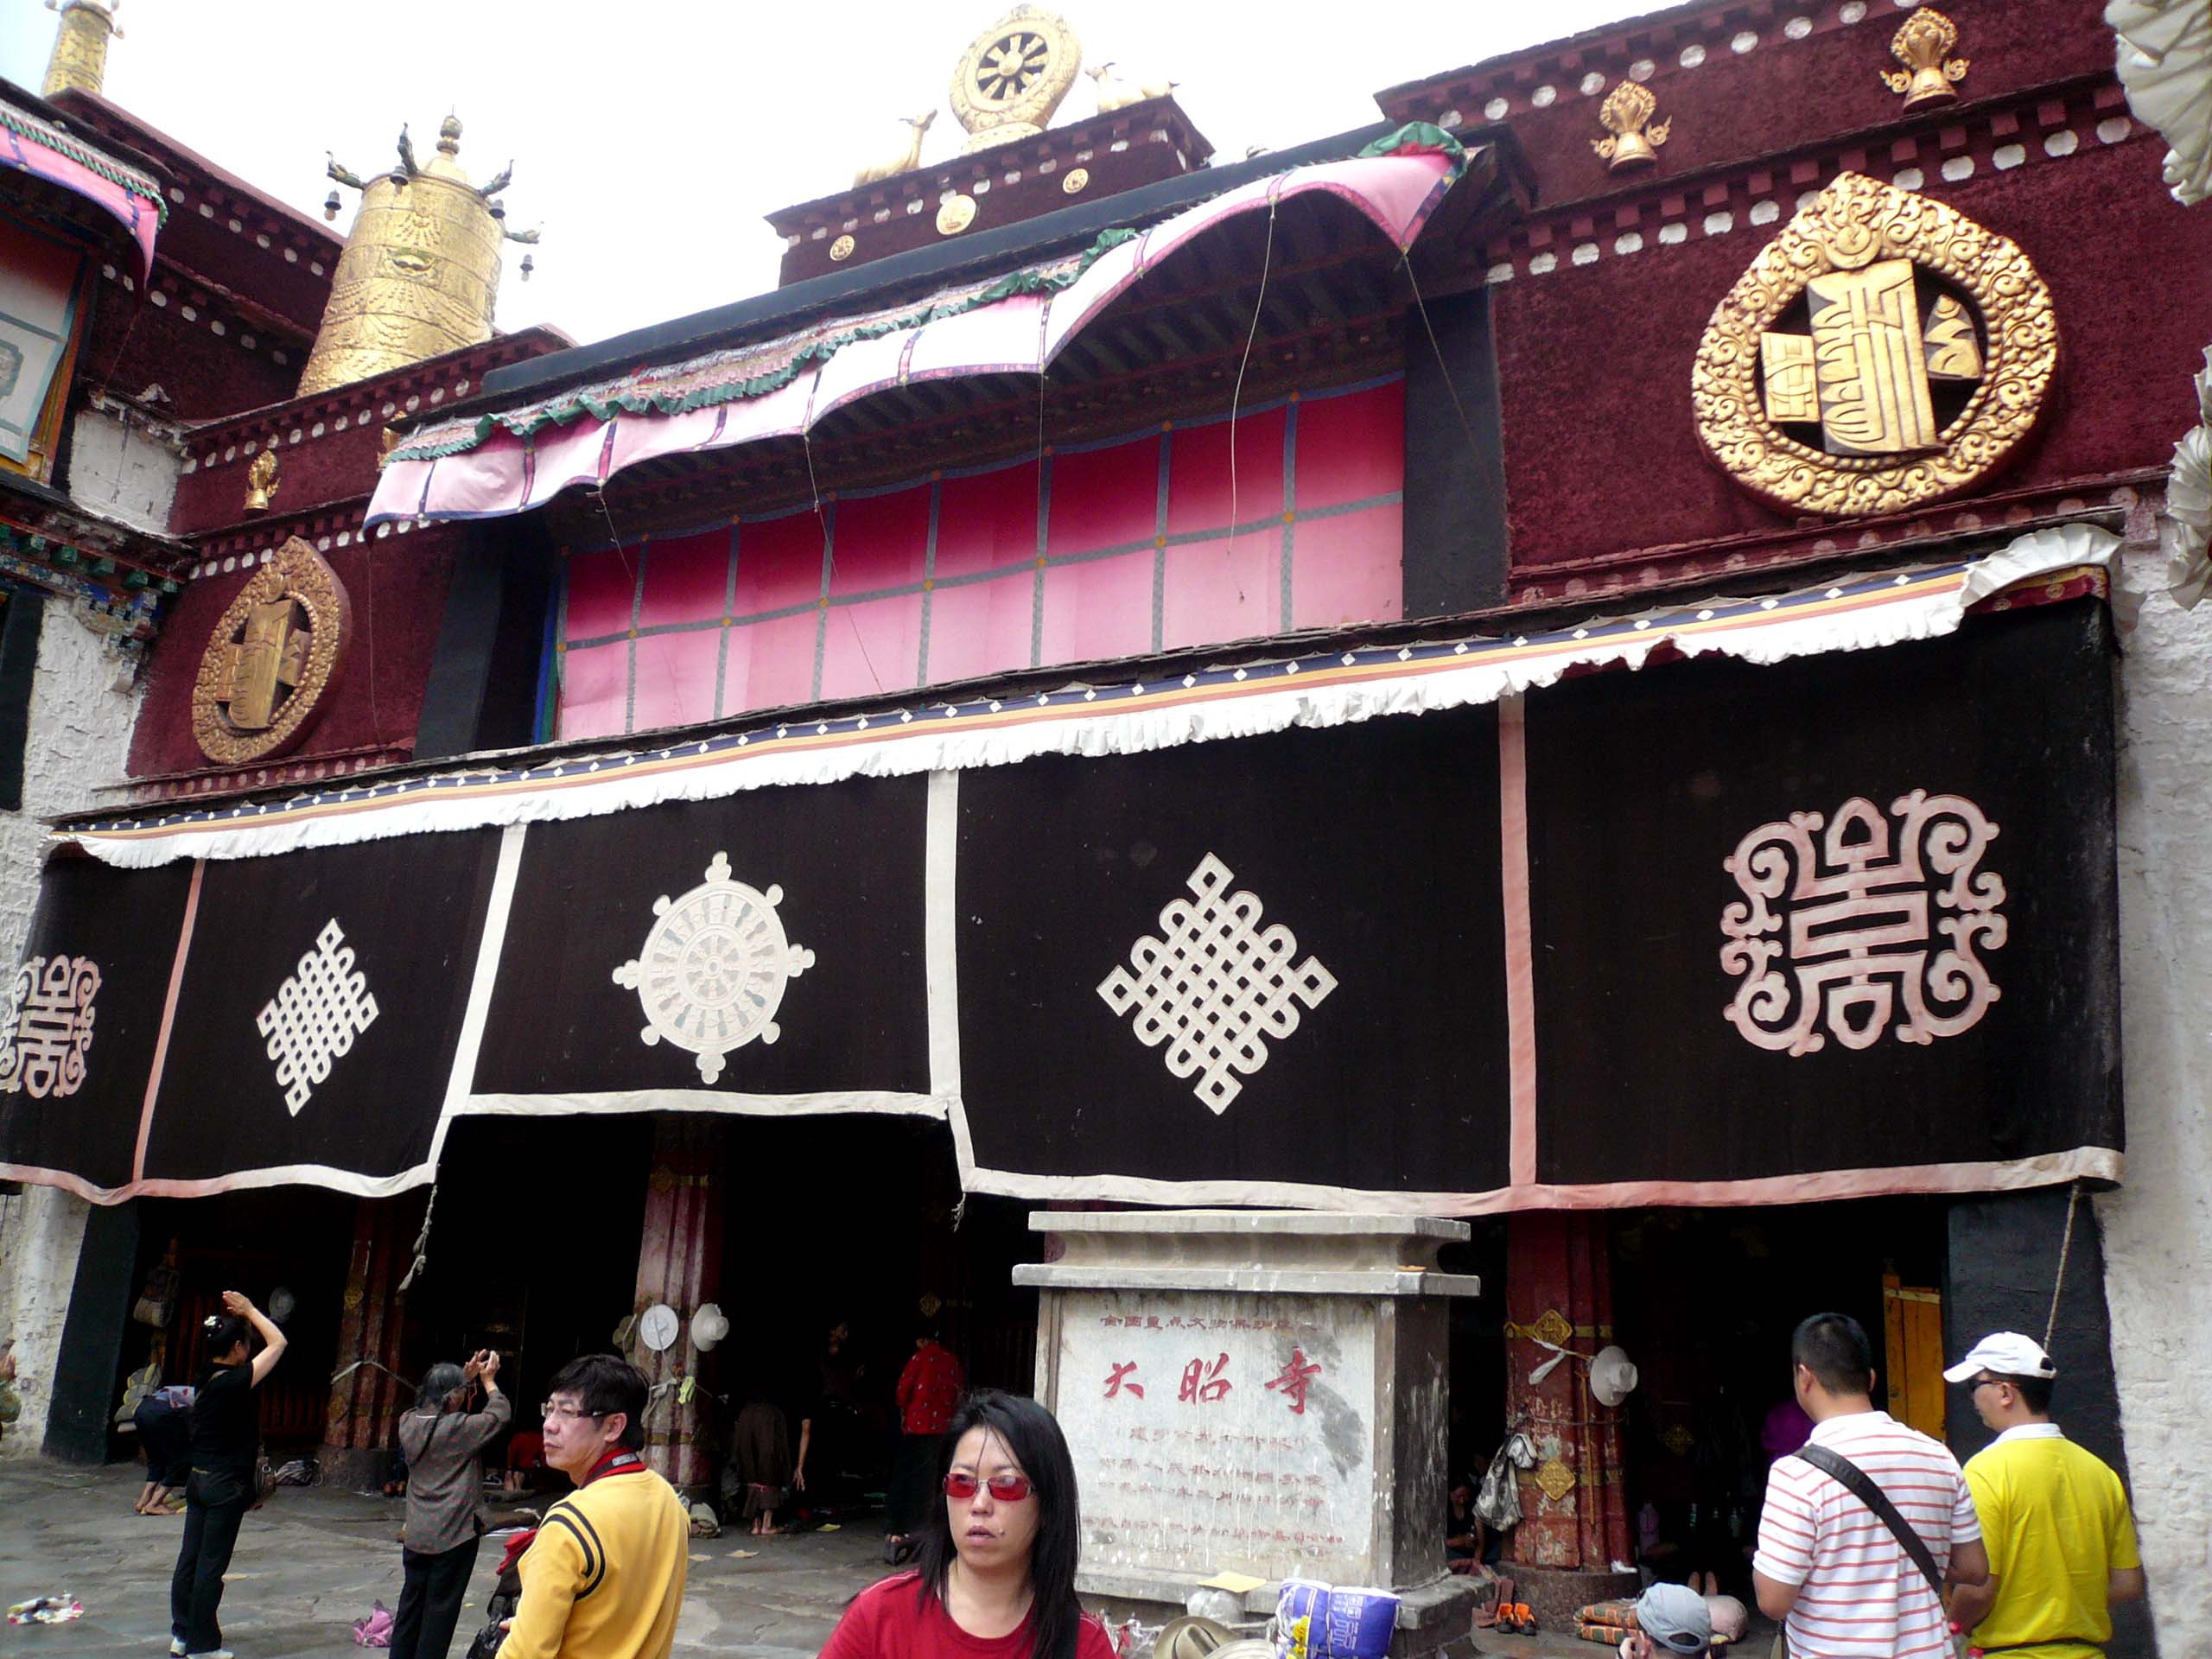 Main entrance of the temple